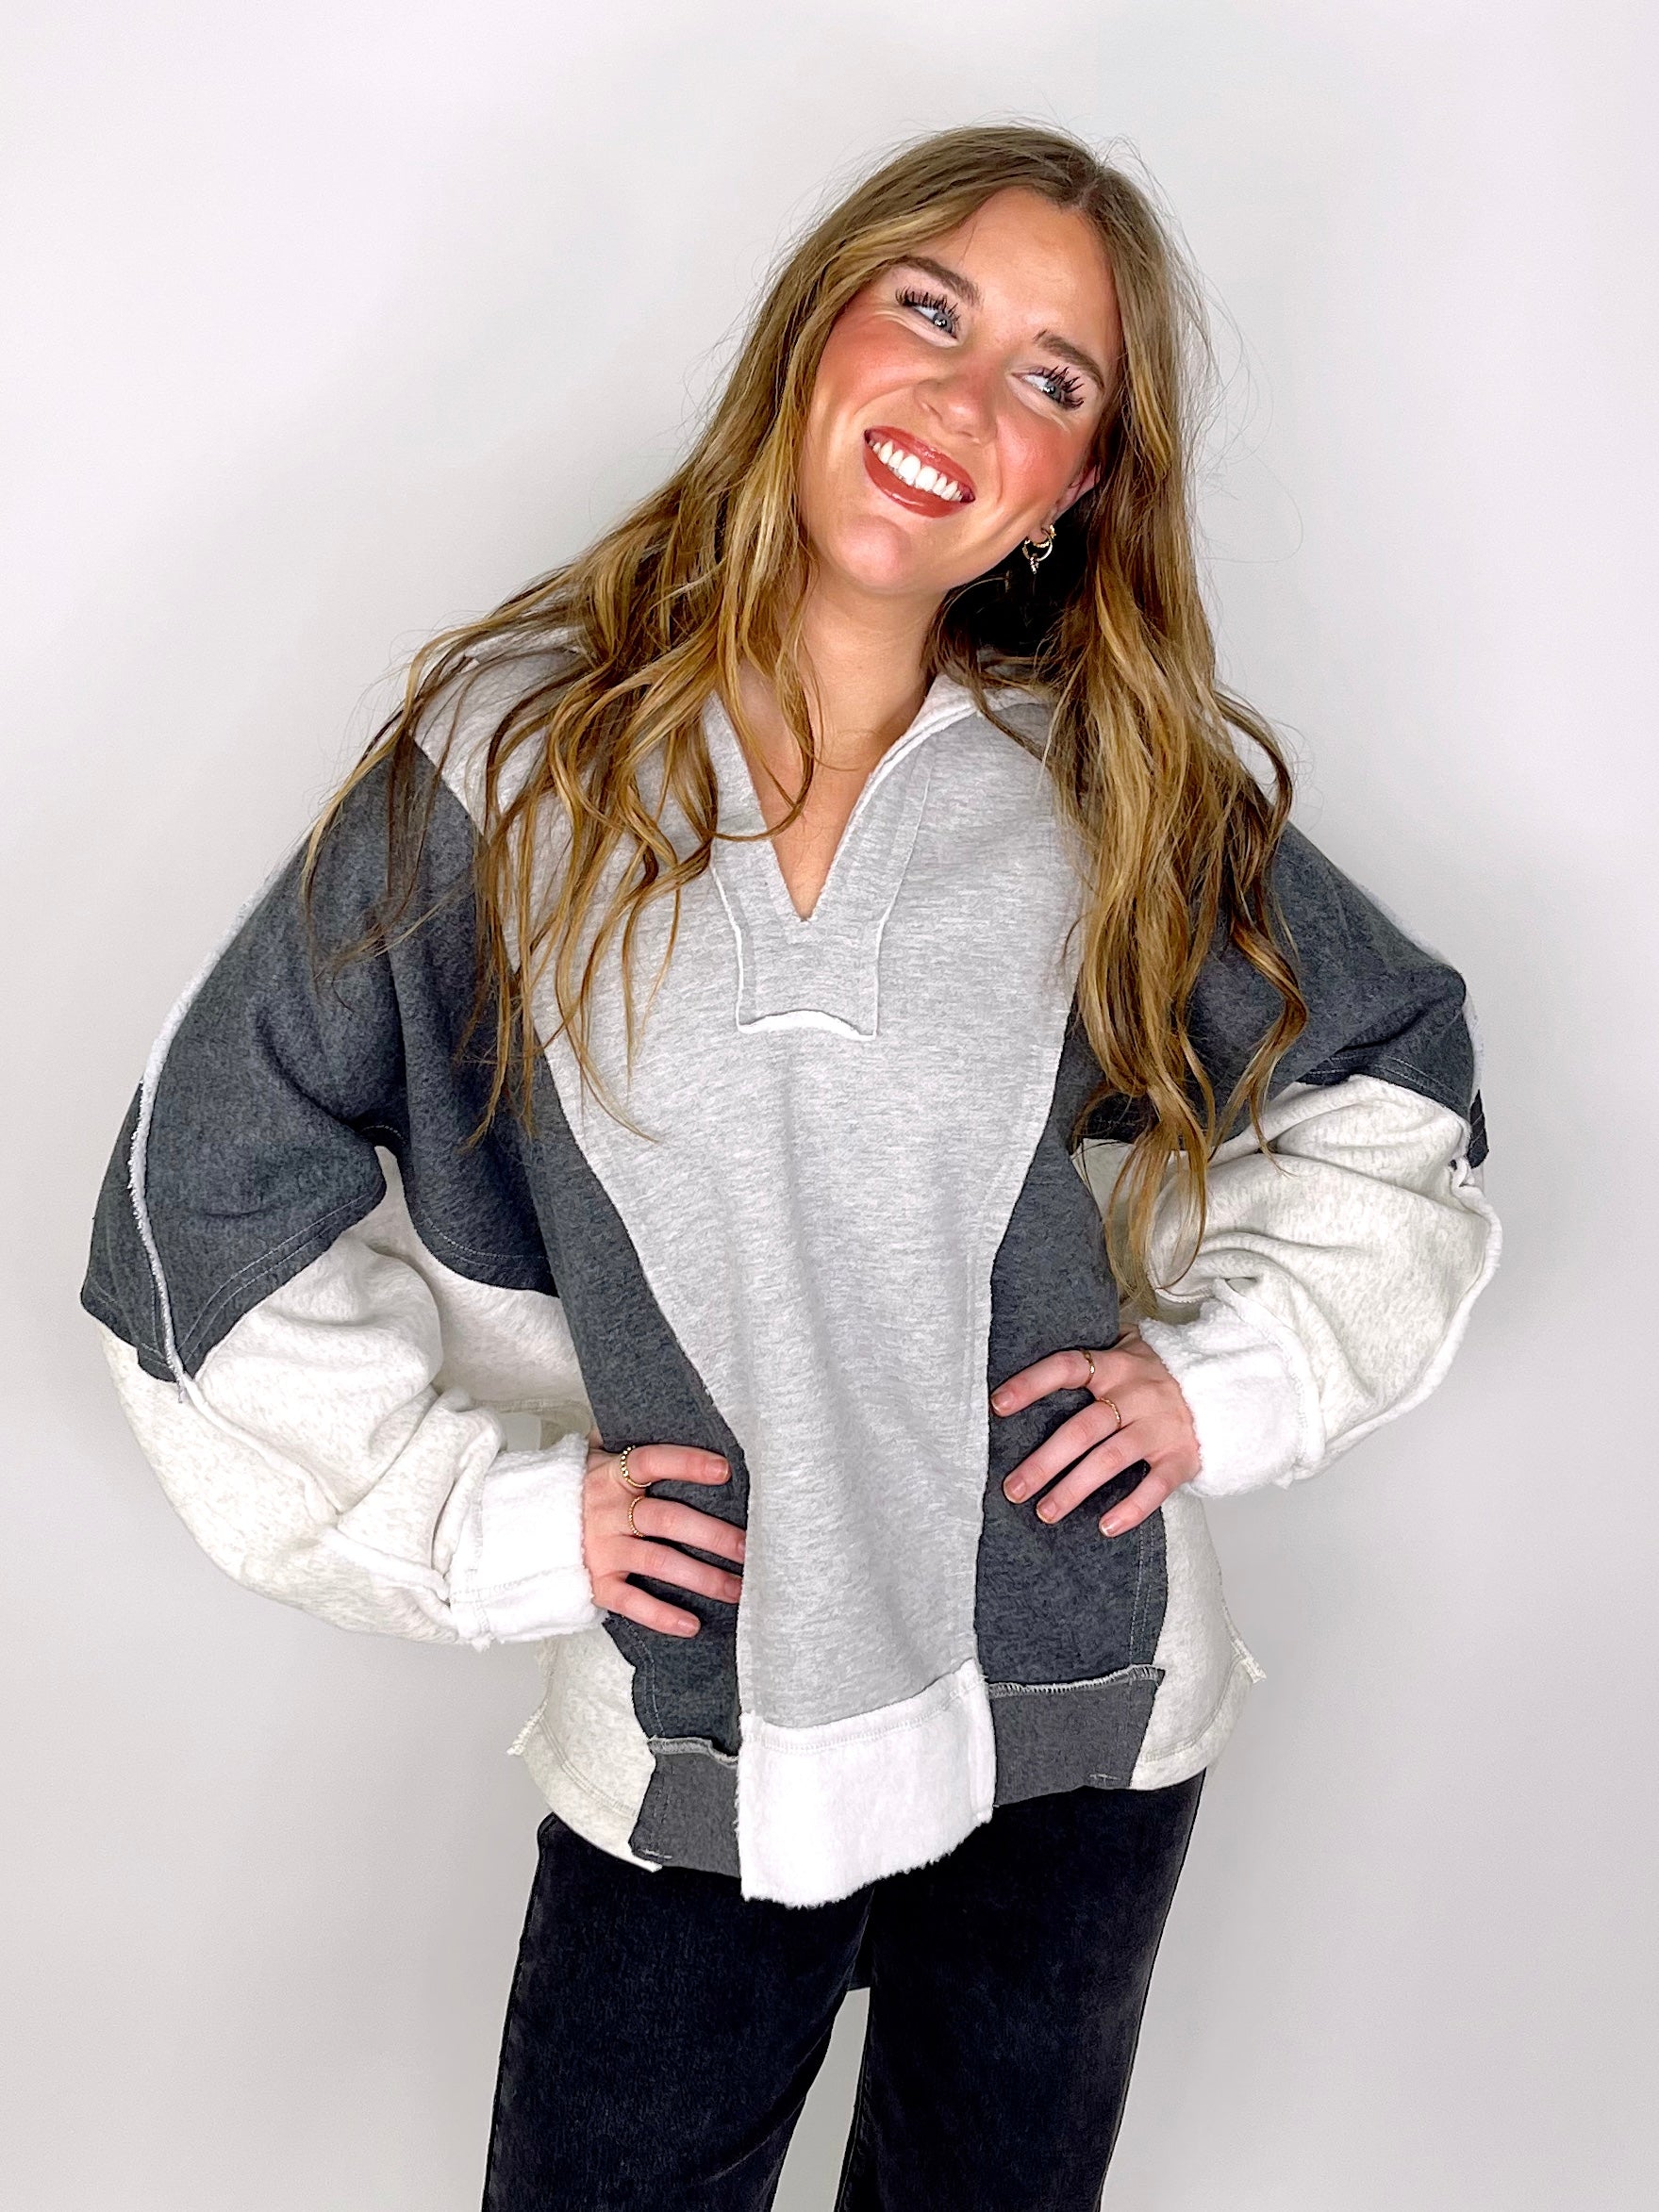 The Abba Sweatshirt-Sweatshirt-Aemi + Co-The Village Shoppe, Women’s Fashion Boutique, Shop Online and In Store - Located in Muscle Shoals, AL.